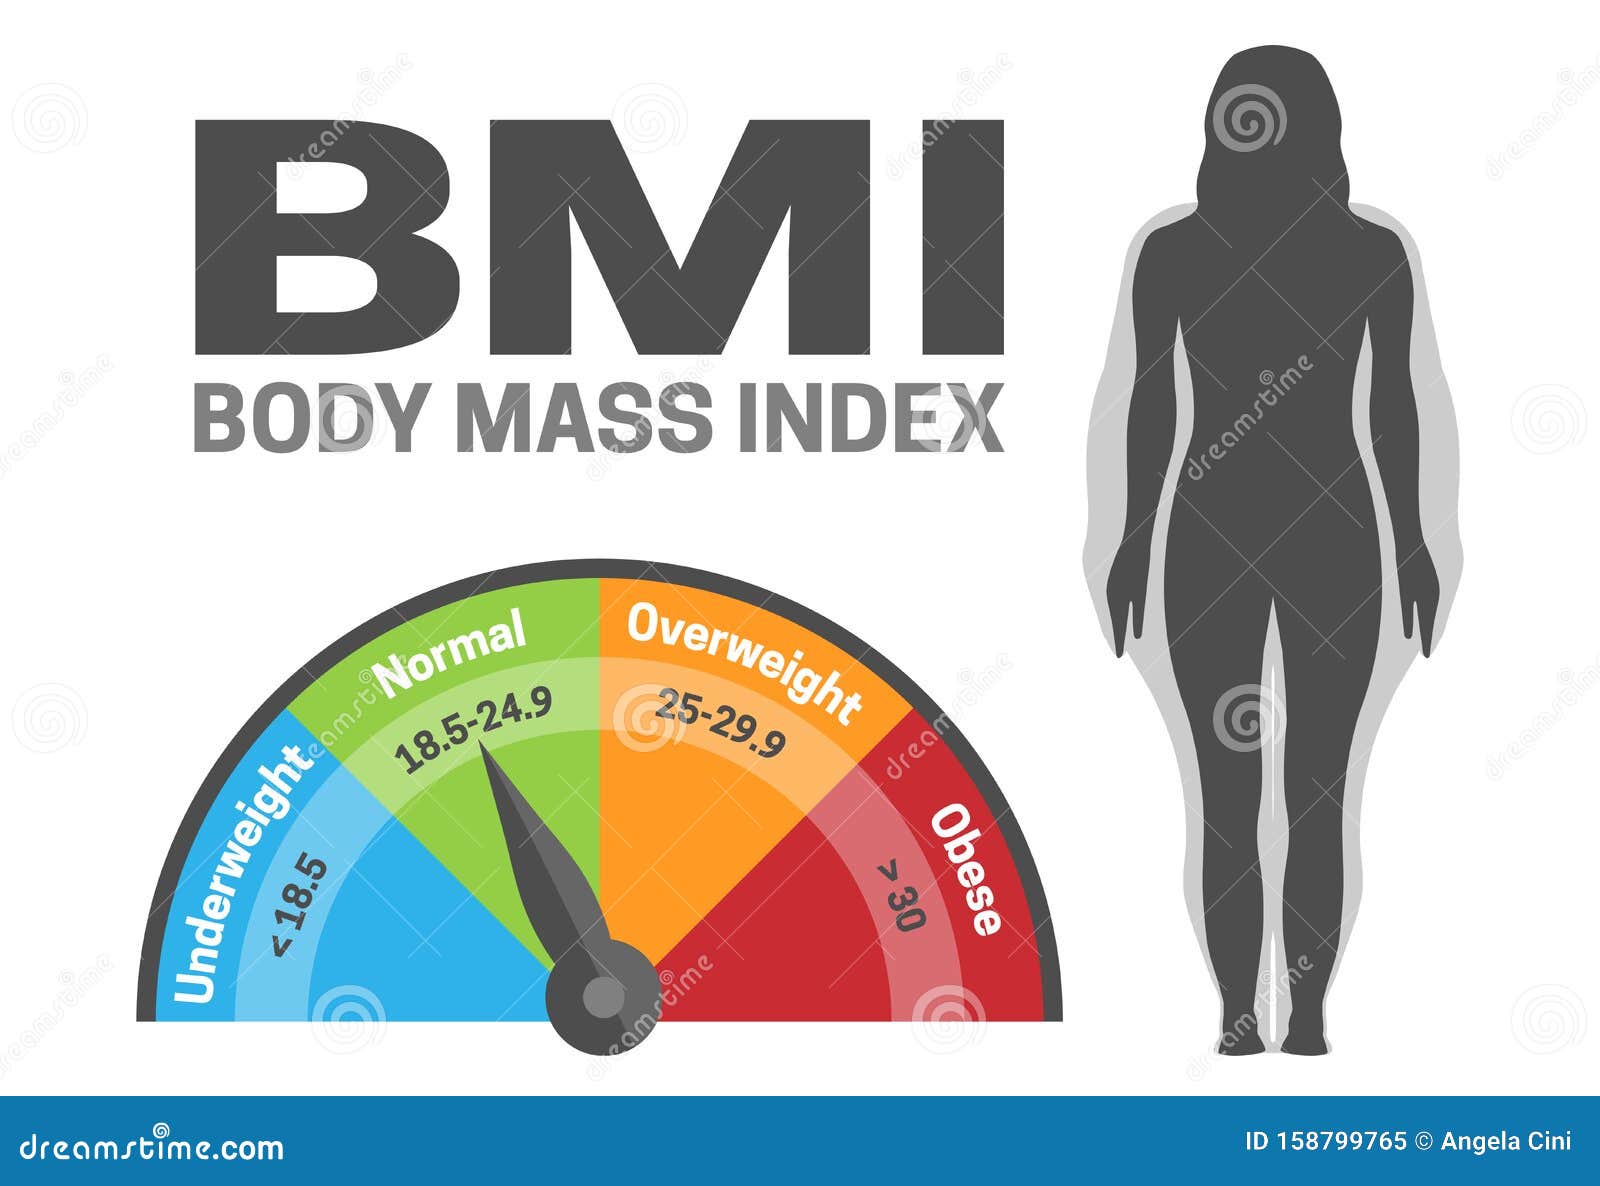 https://thumbs.dreamstime.com/z/bmi-body-mass-index-infographic-vector-illustration-woman-silhouette-normal-to-obese-weight-weight-loss-gain-bmi-body-158799765.jpg